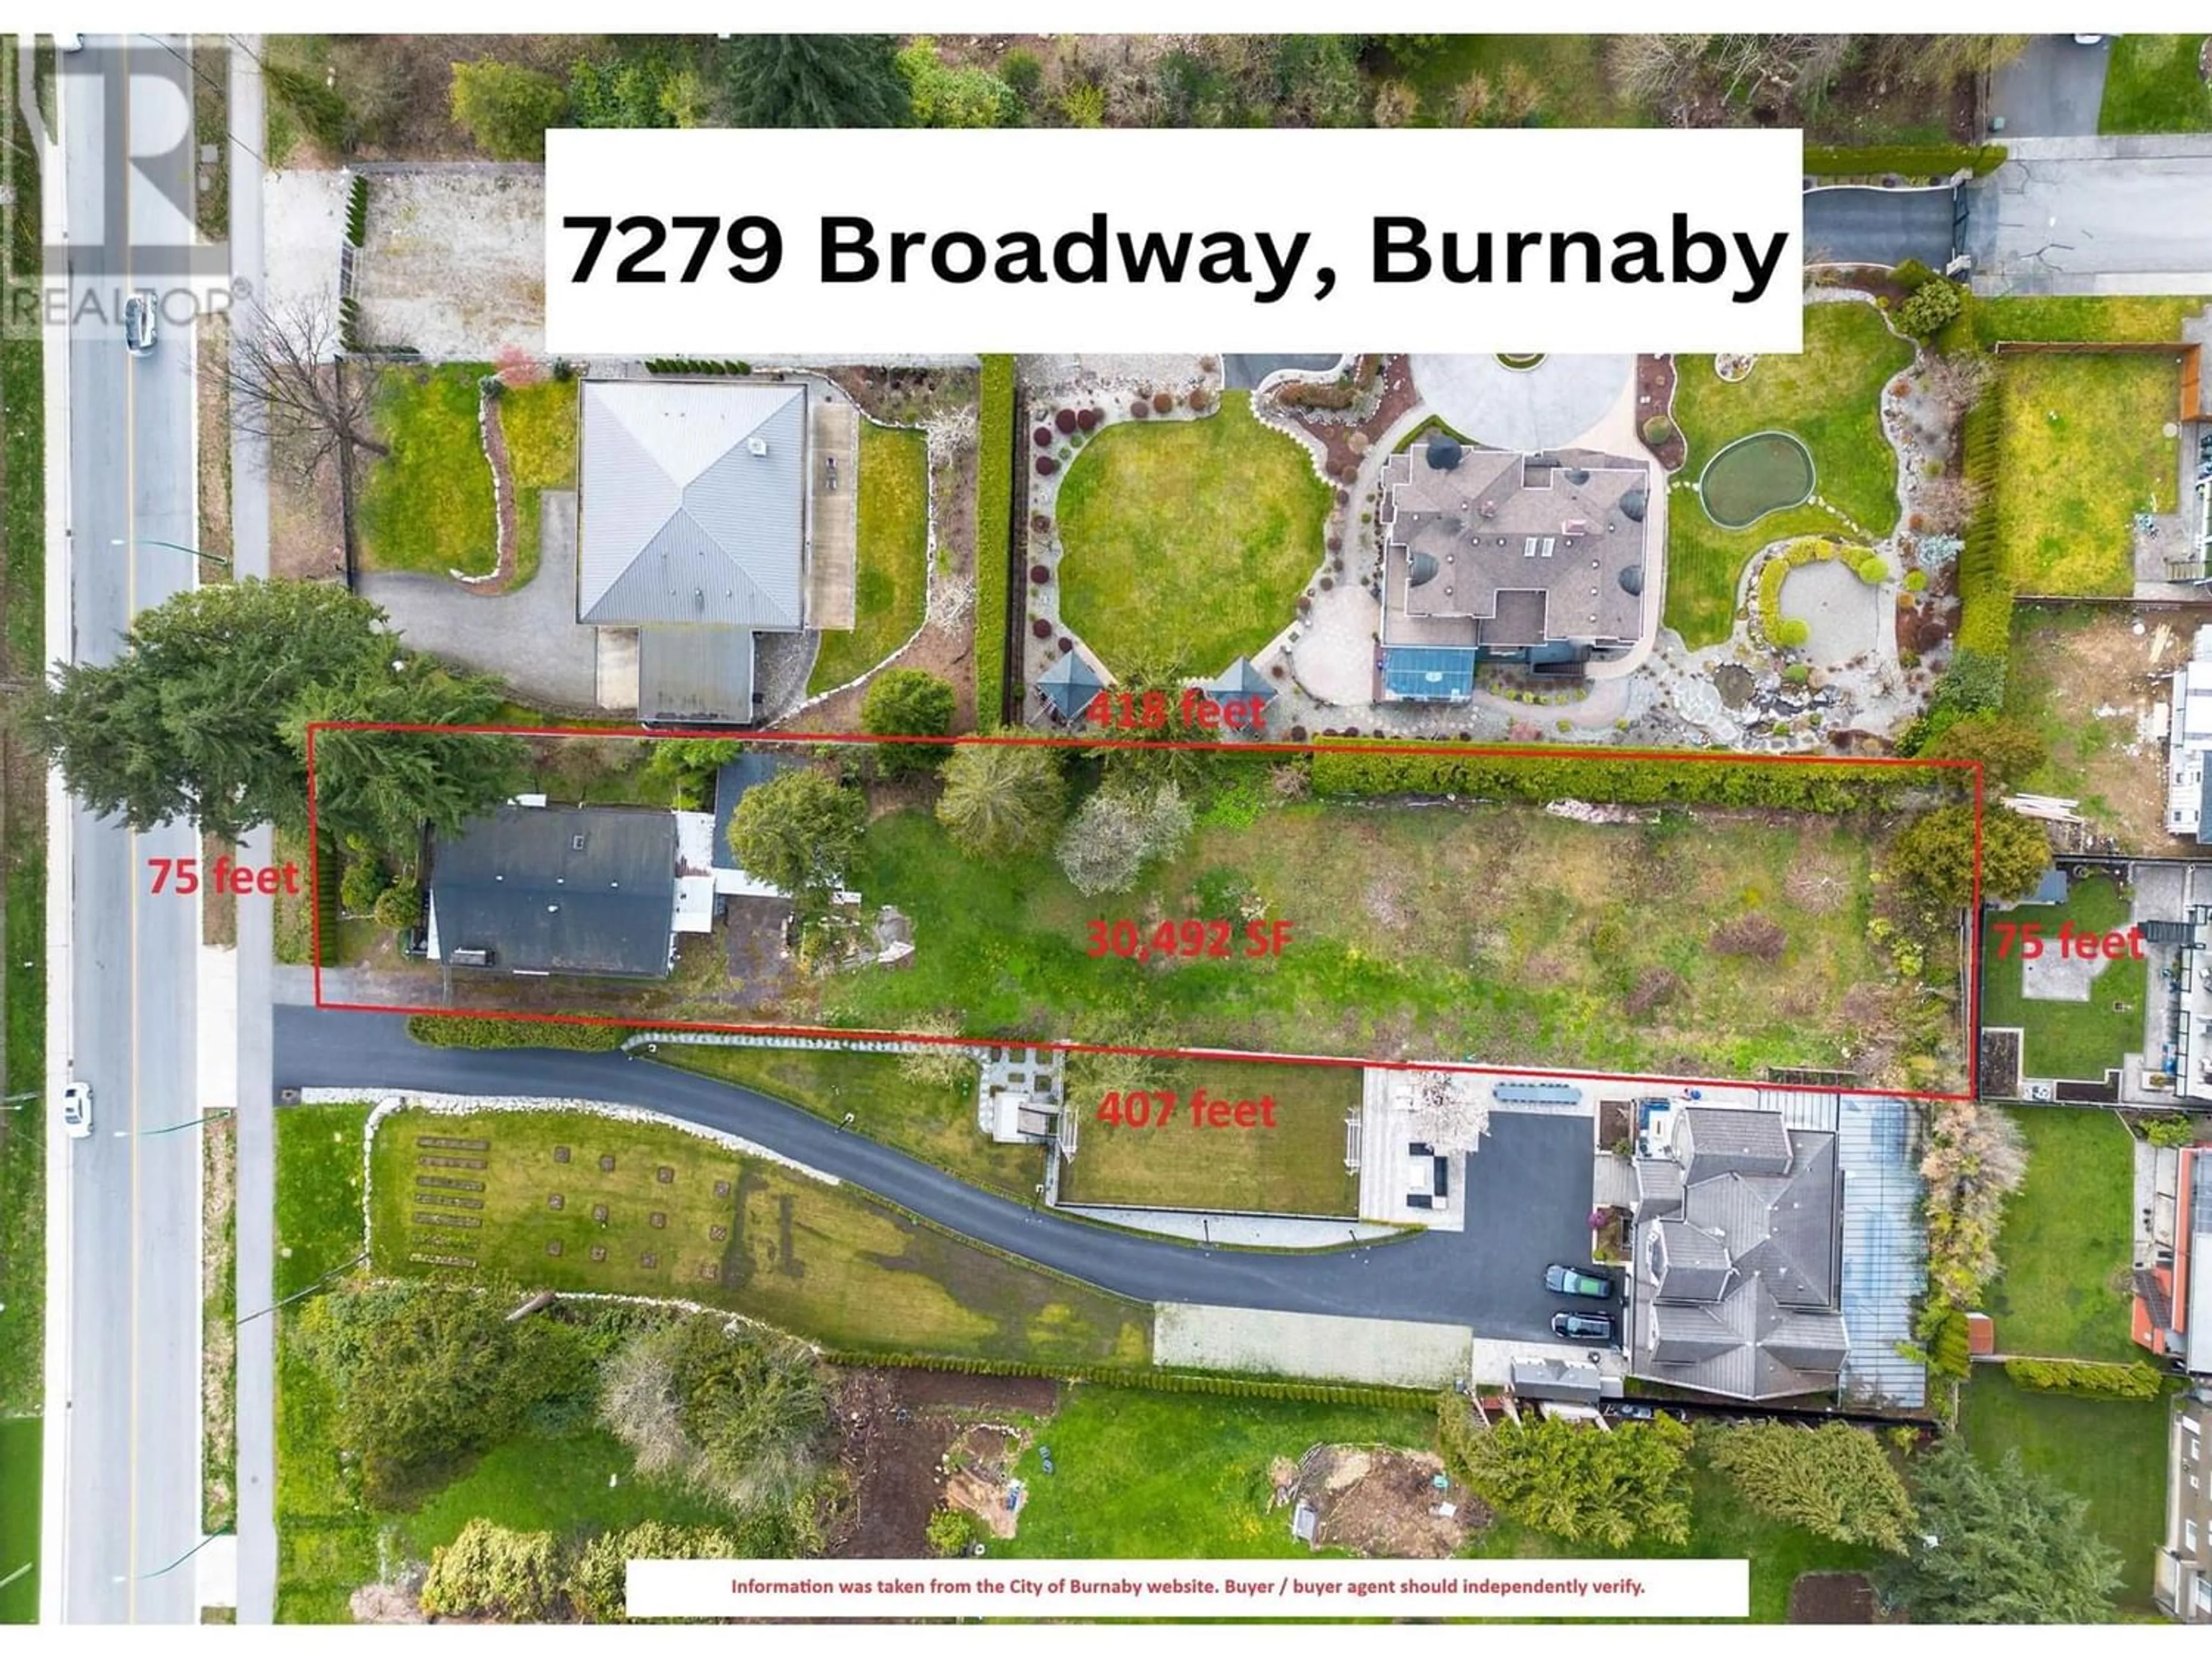 Street view for 7279 BROADWAY, Burnaby British Columbia V5A1S1